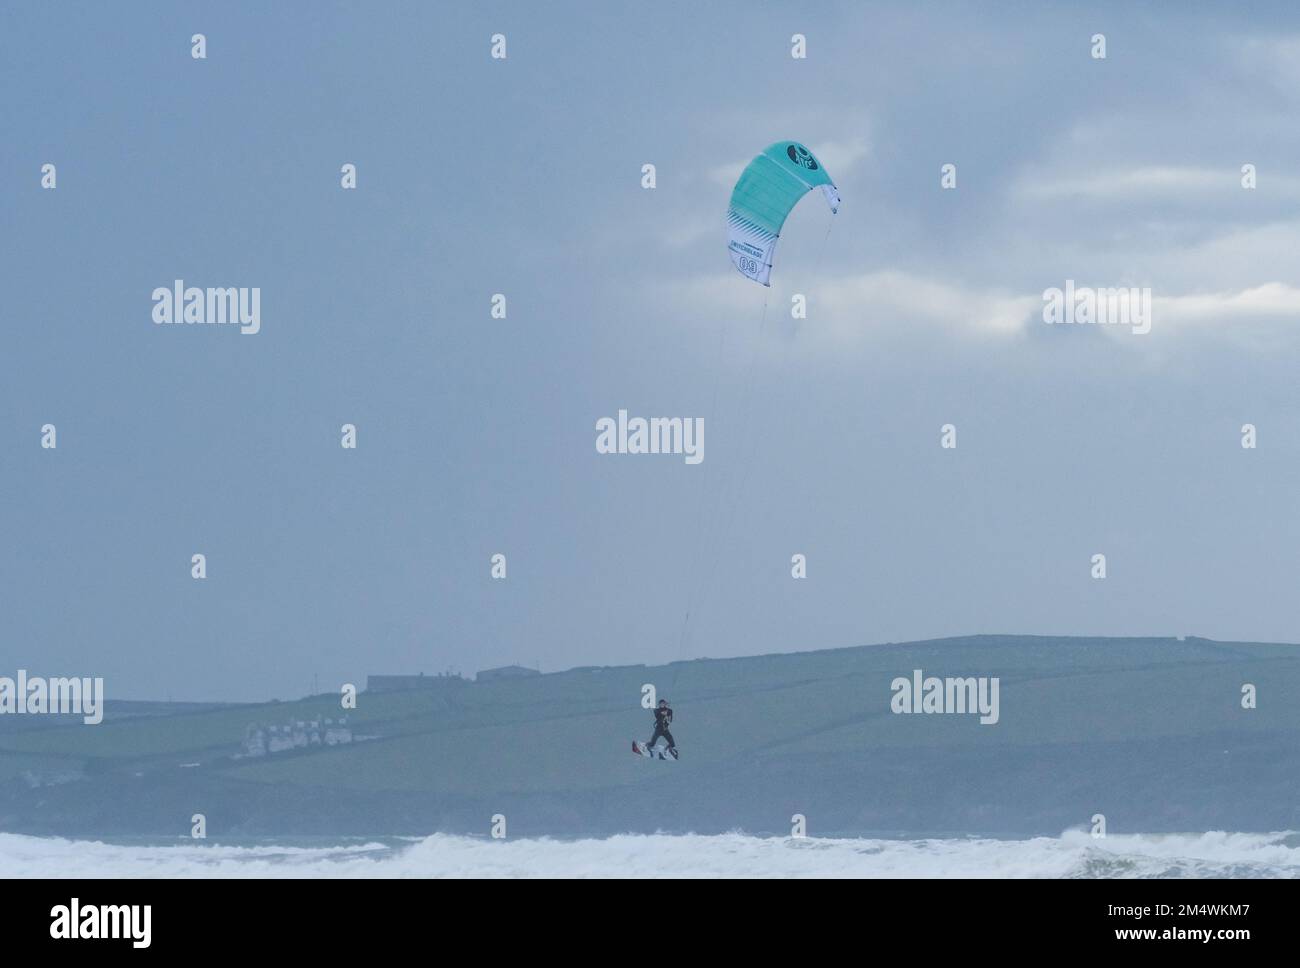 Polzeath, Cornwall, UK.23rd December 2022. UK Weather. It was blustery but fine on the beach at Polzeath this afternoon. With kite surfers and dog walkers enjoying the conditions. Credit SImon Maycock / Alamy Live News. Stock Photo